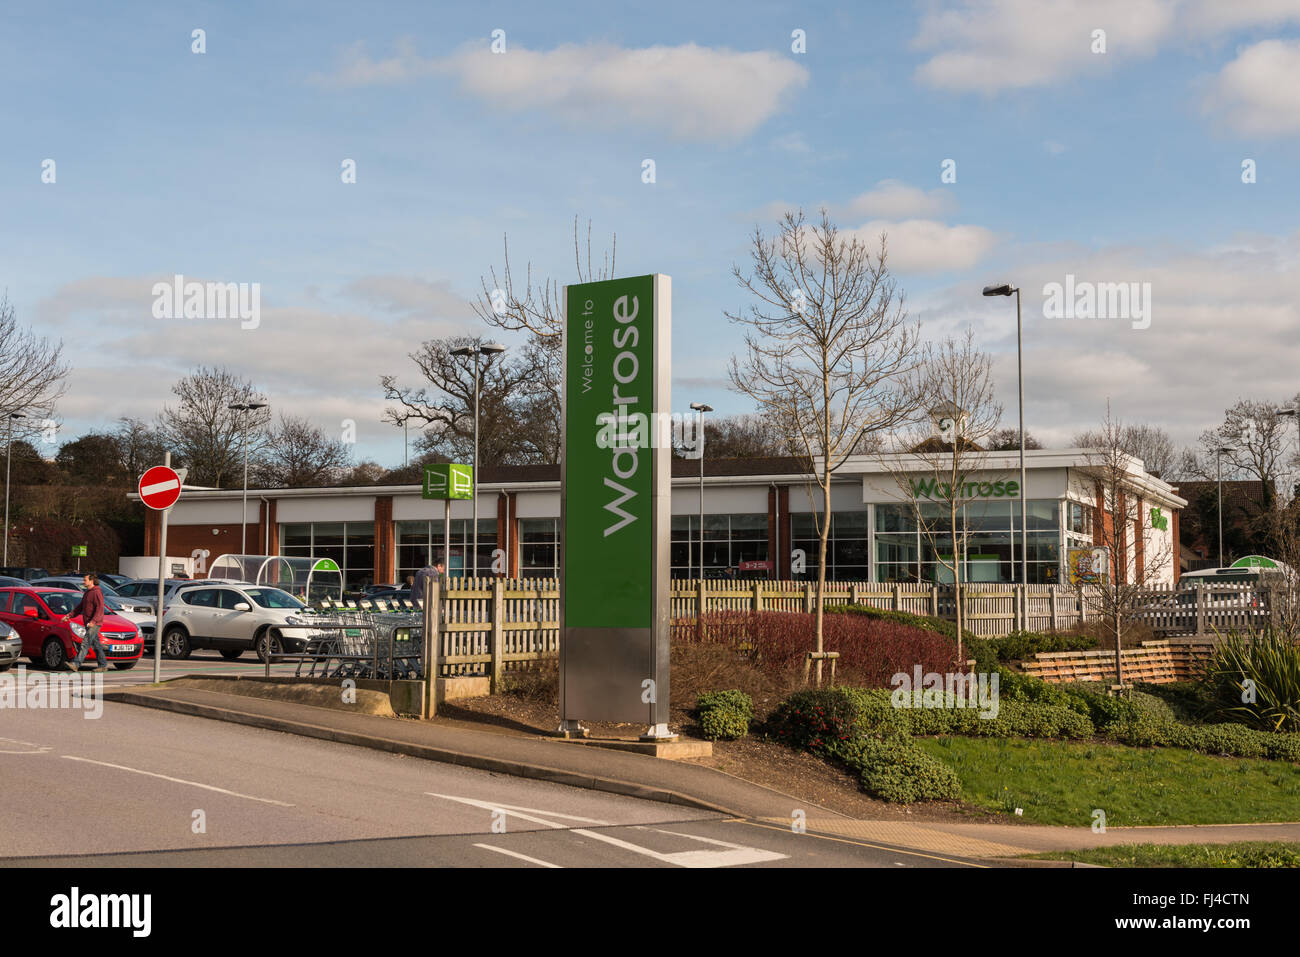 Sidmouth, Devon. The Waitrose supermarket and car park at Sidmouth. Stock Photo